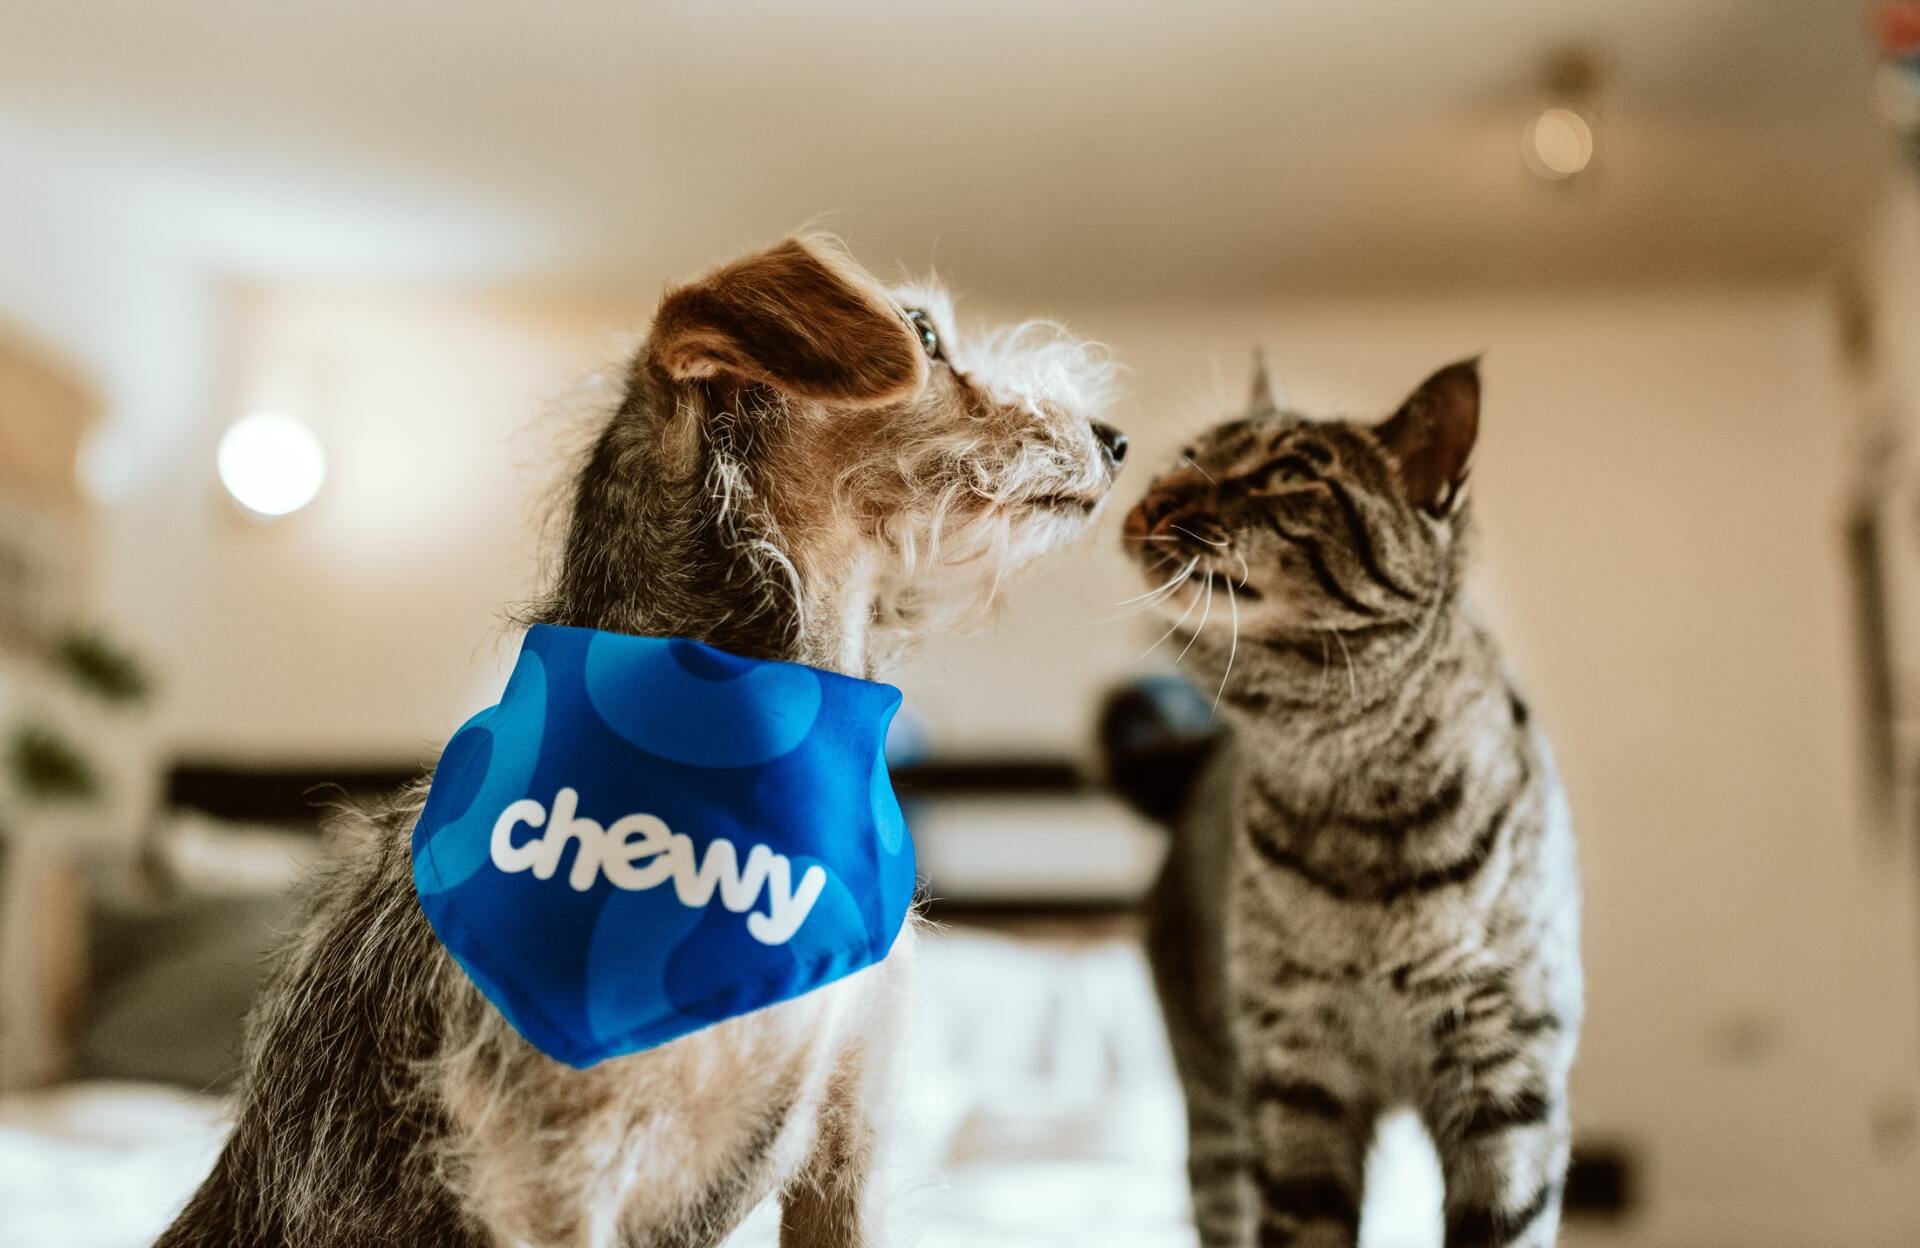 a dog wearing a chewy bandana looks at a cat